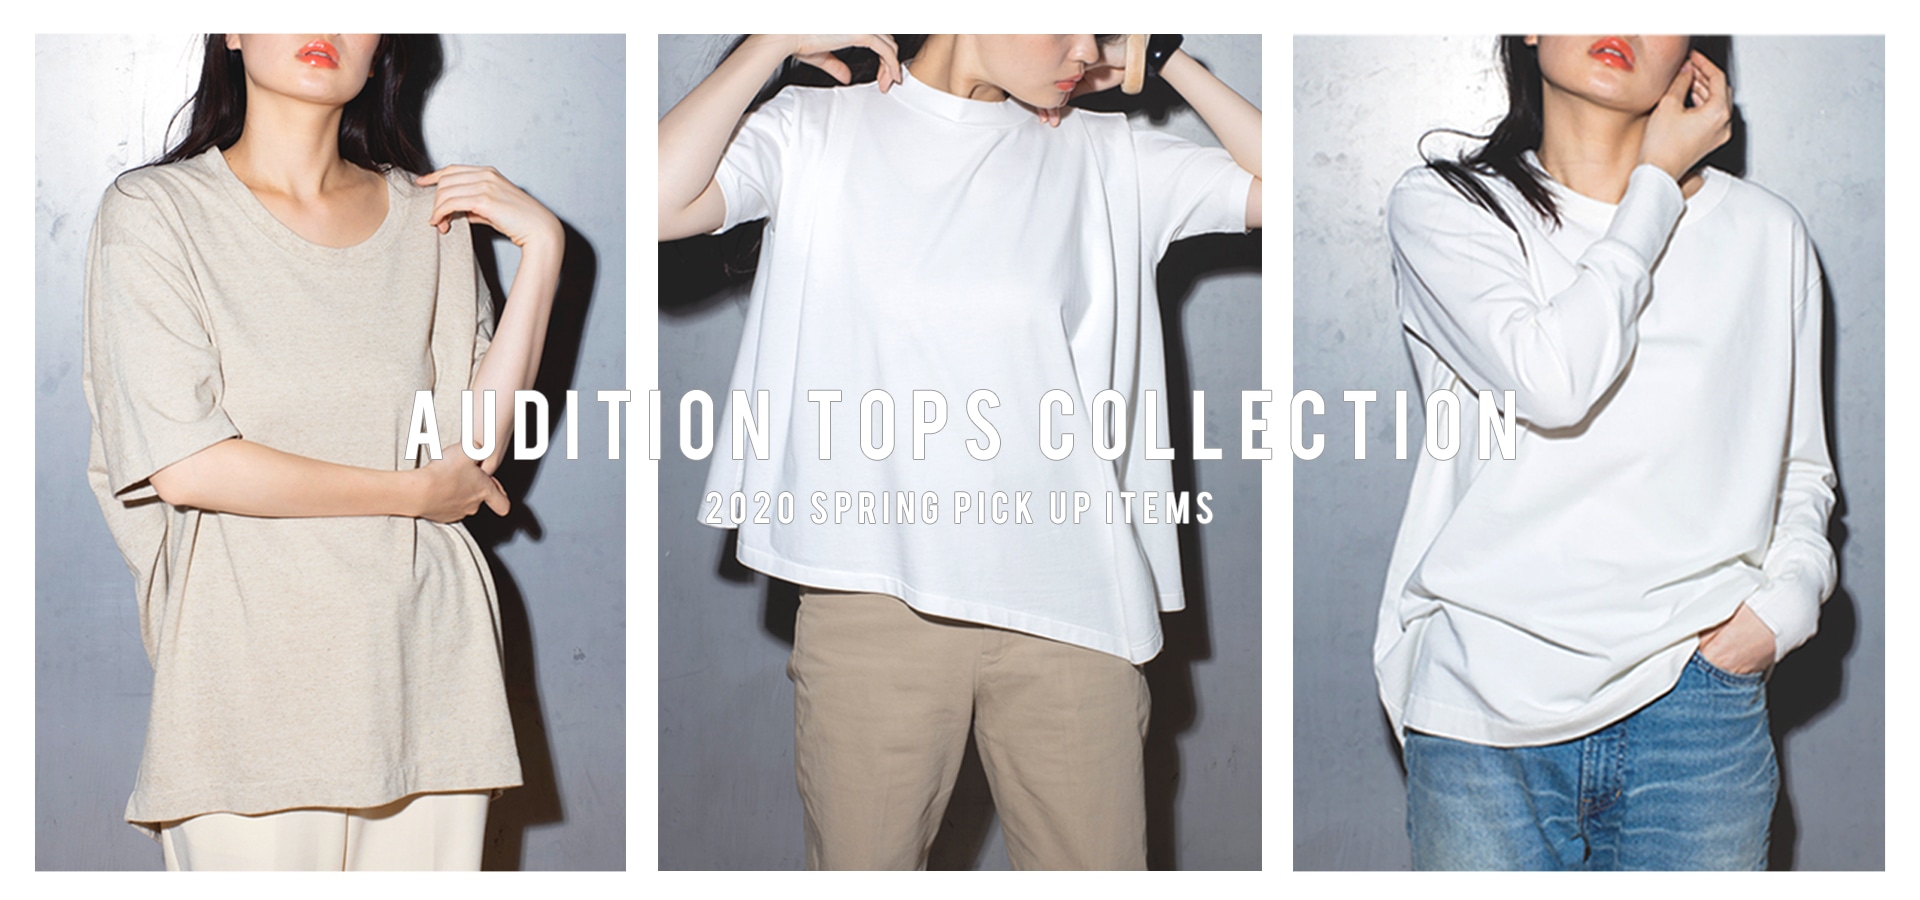 AUDITION TOPS COLLECTION - ALL ITEMS